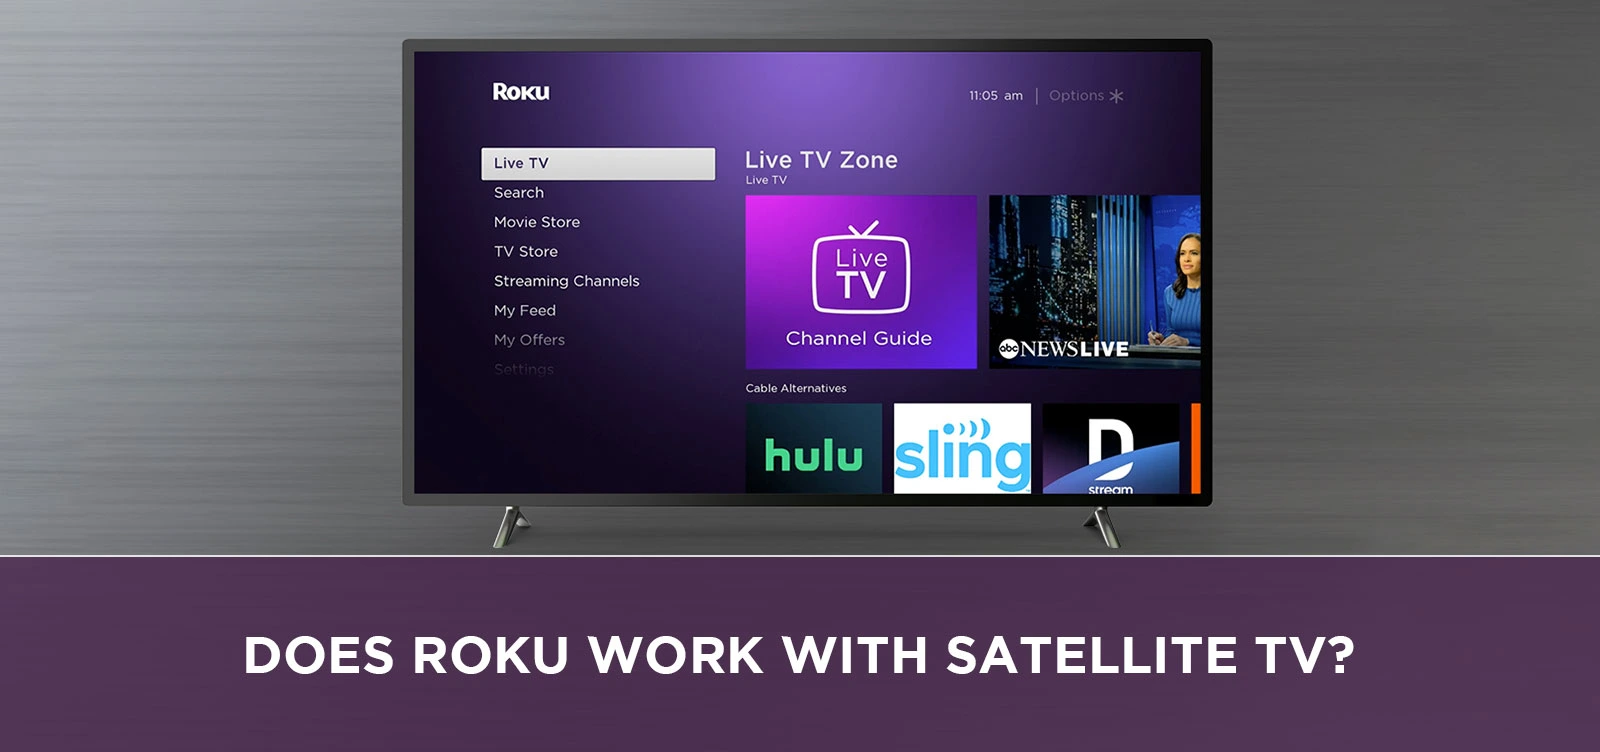 Does Roku Work with Satellite TV?